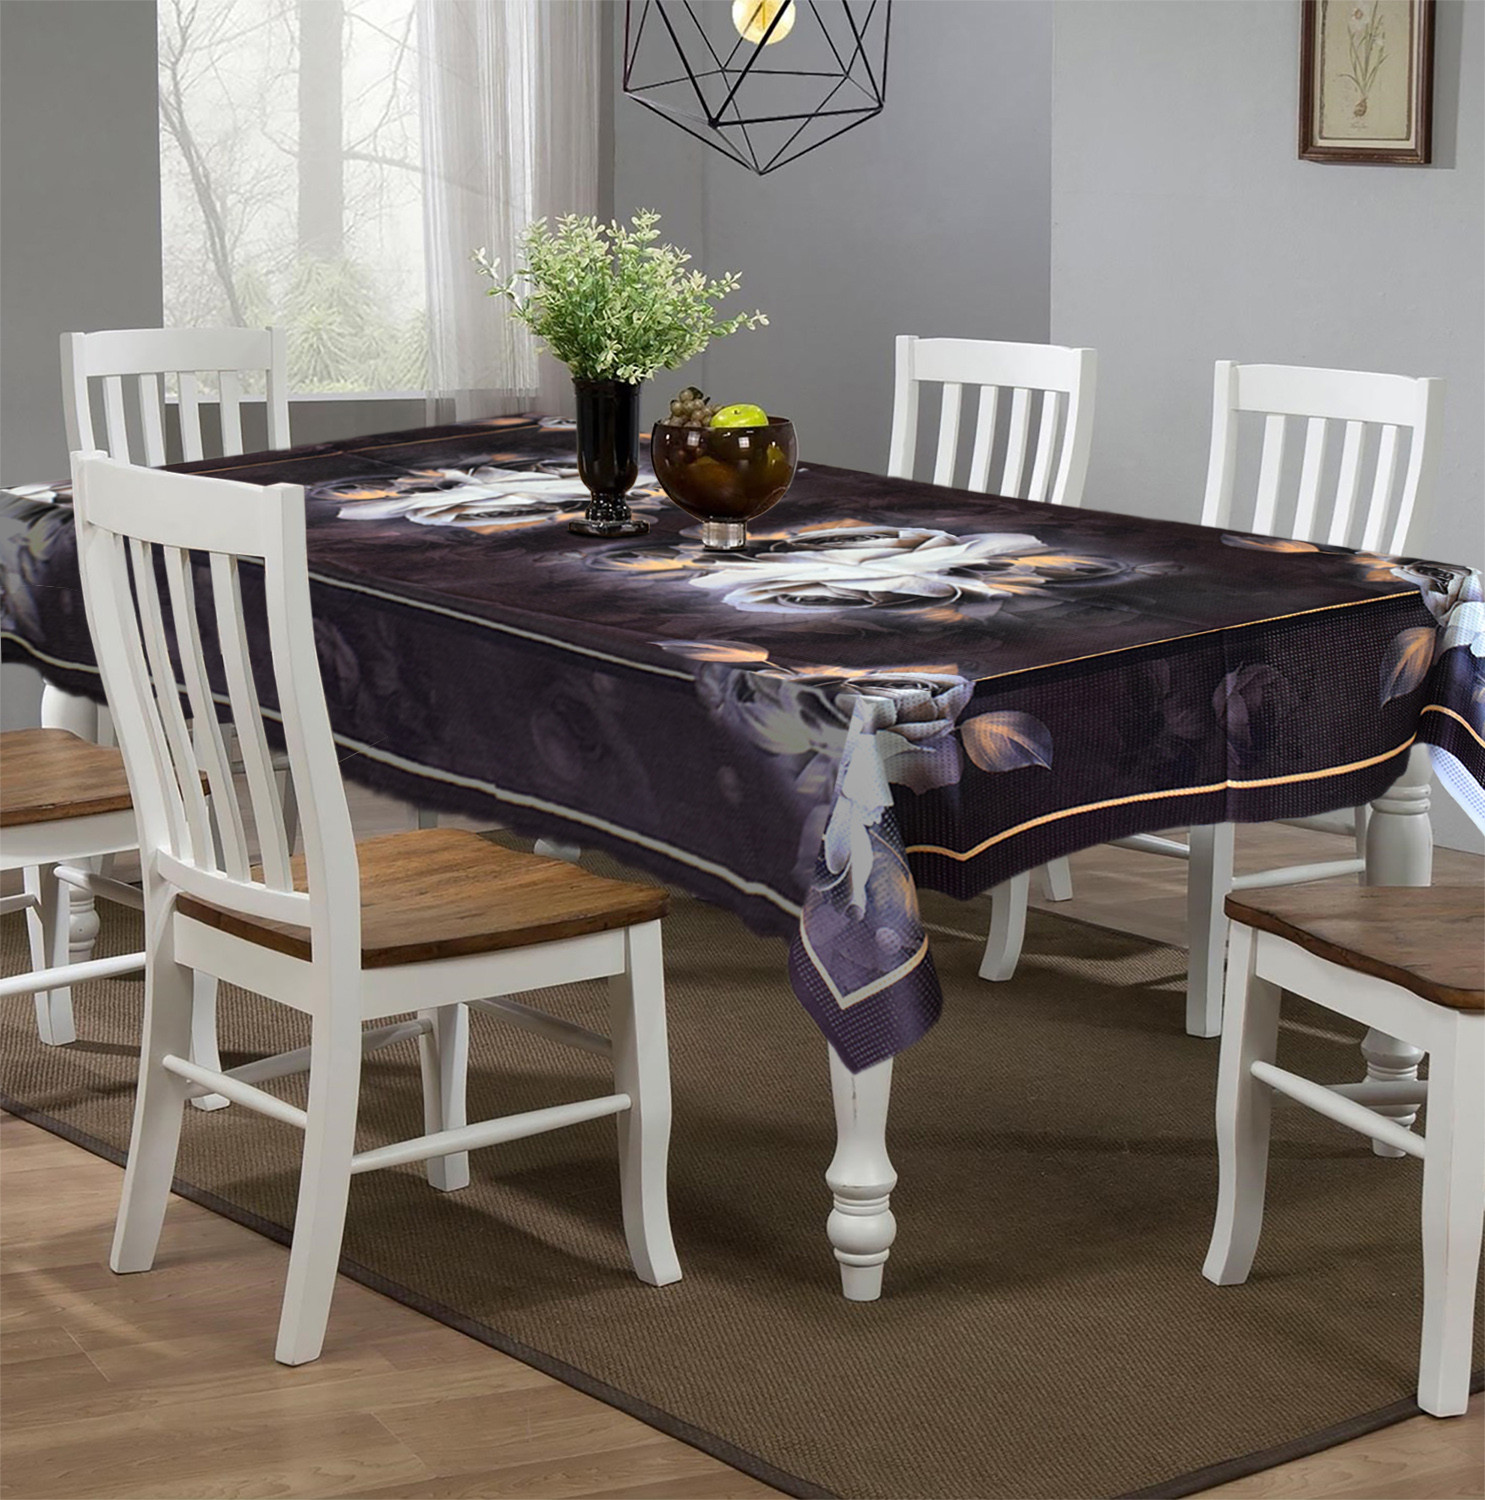 Kuber Industries Rose Printed Cotton 6 Seater Dinning Table Cover- 60